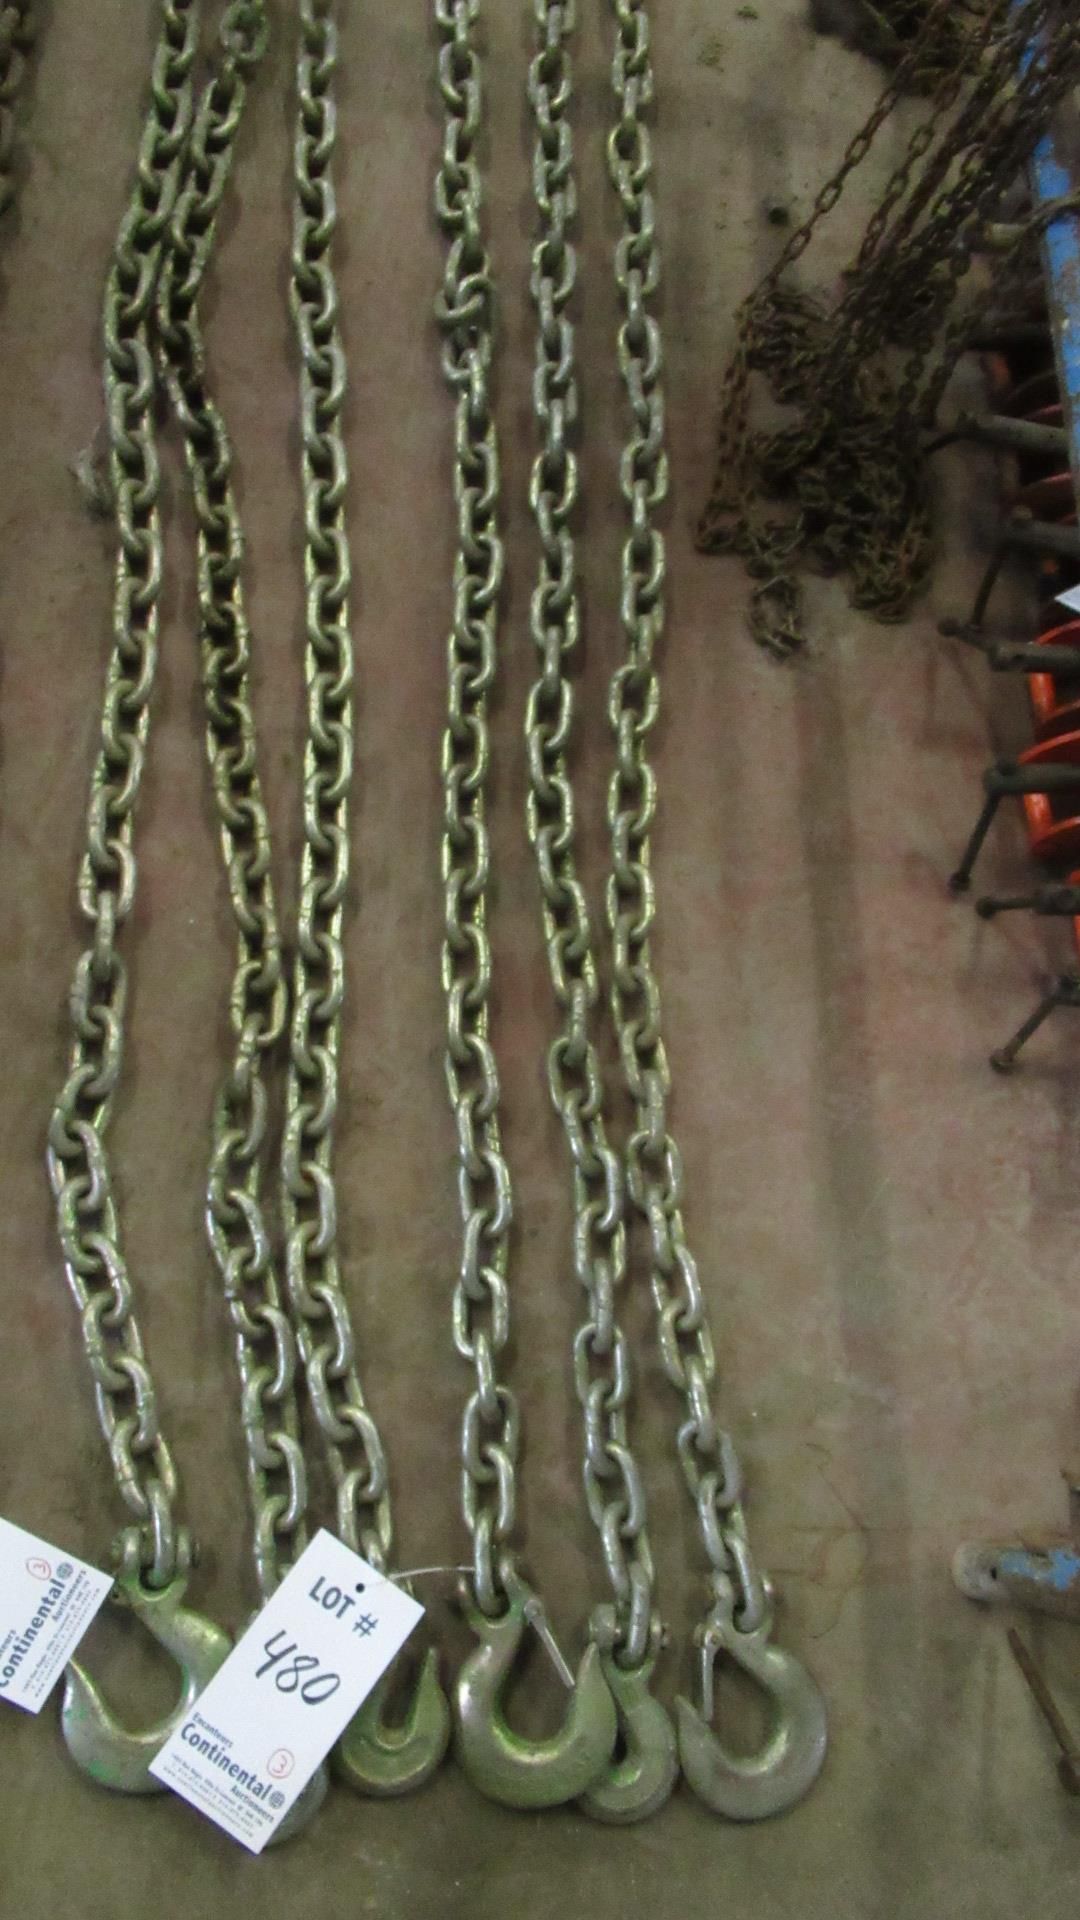 LOT OF 3 LIFTING CHAINS / CHAINES DE LEVAGE